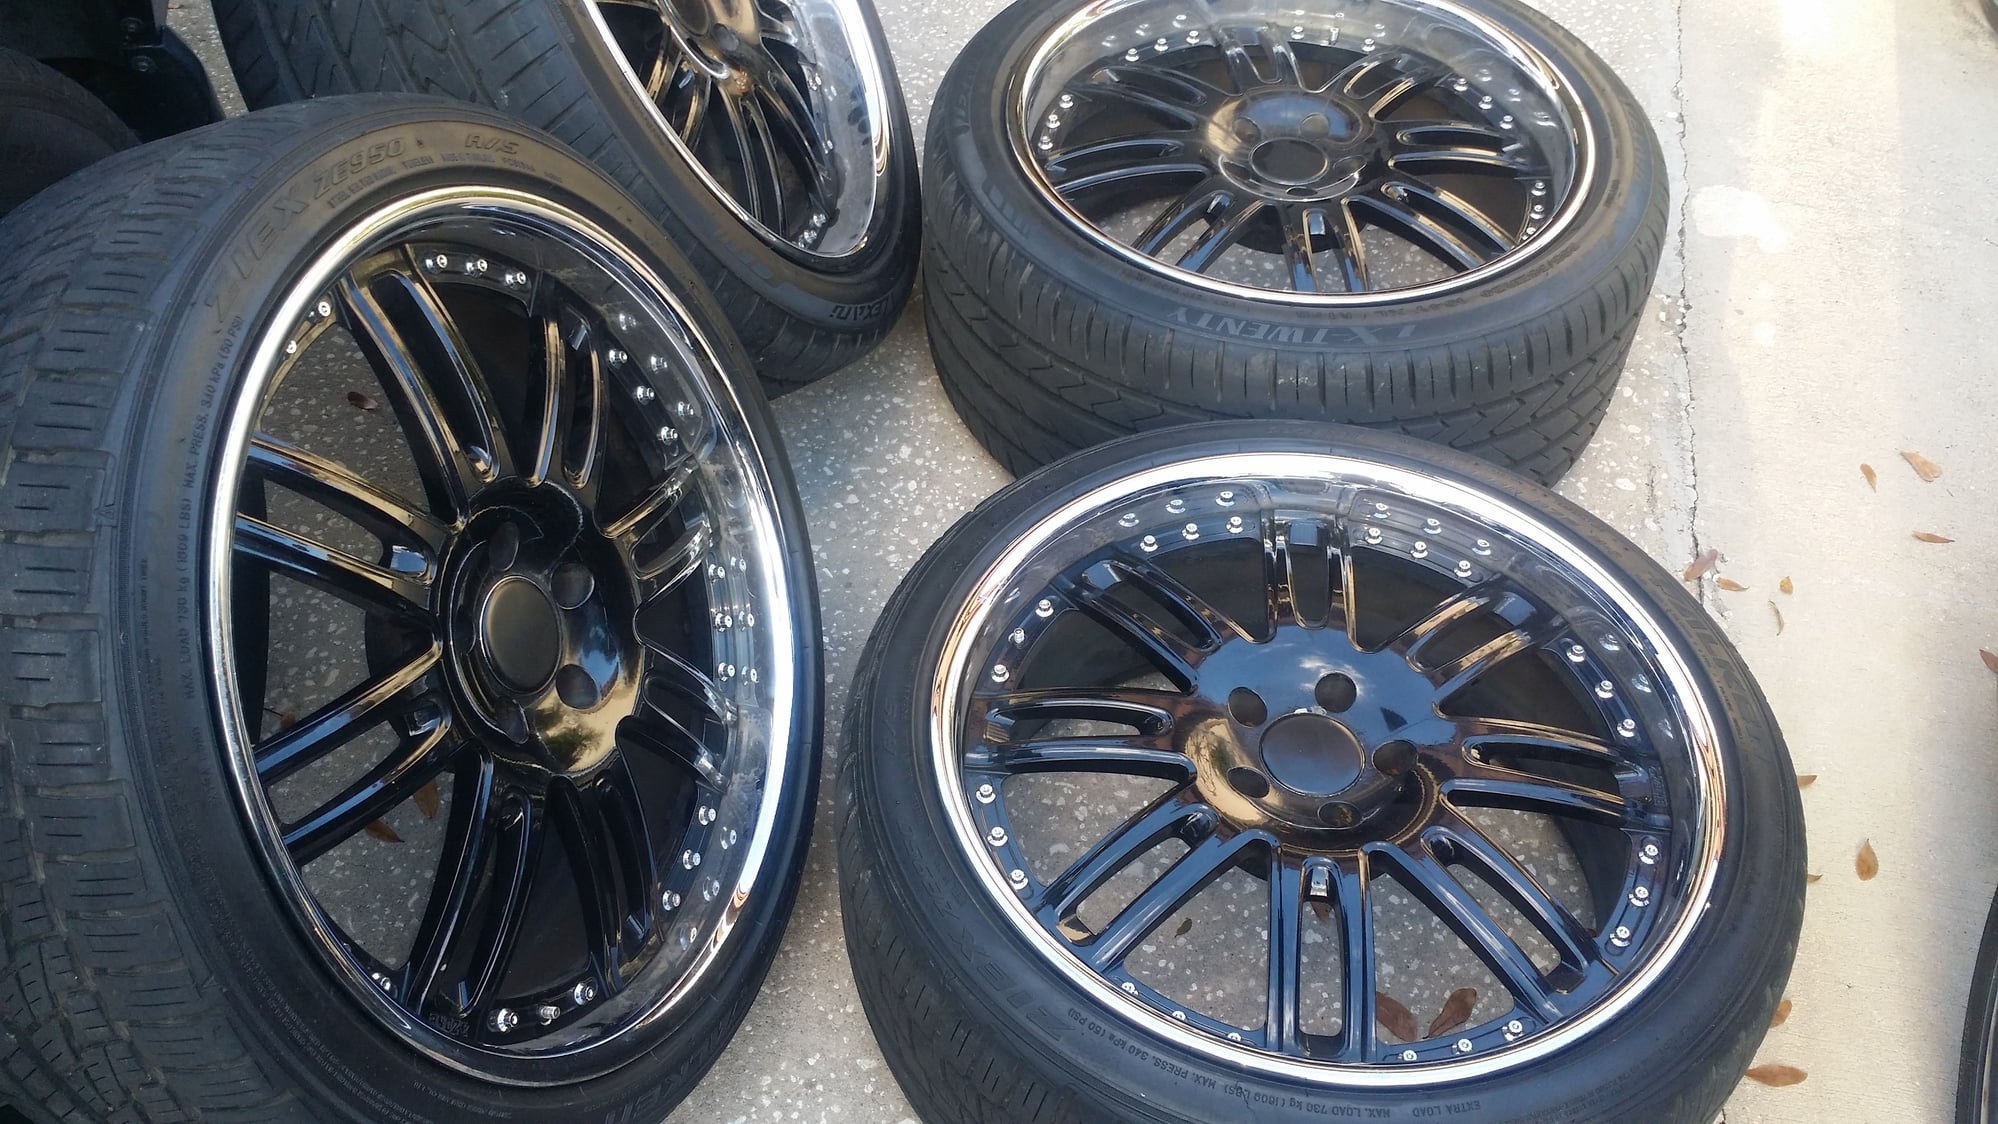 Wheels and Tires/Axles - 20" staggered 3 piece rims w like new tires - Used - Spring Hill, FL 34608, United States